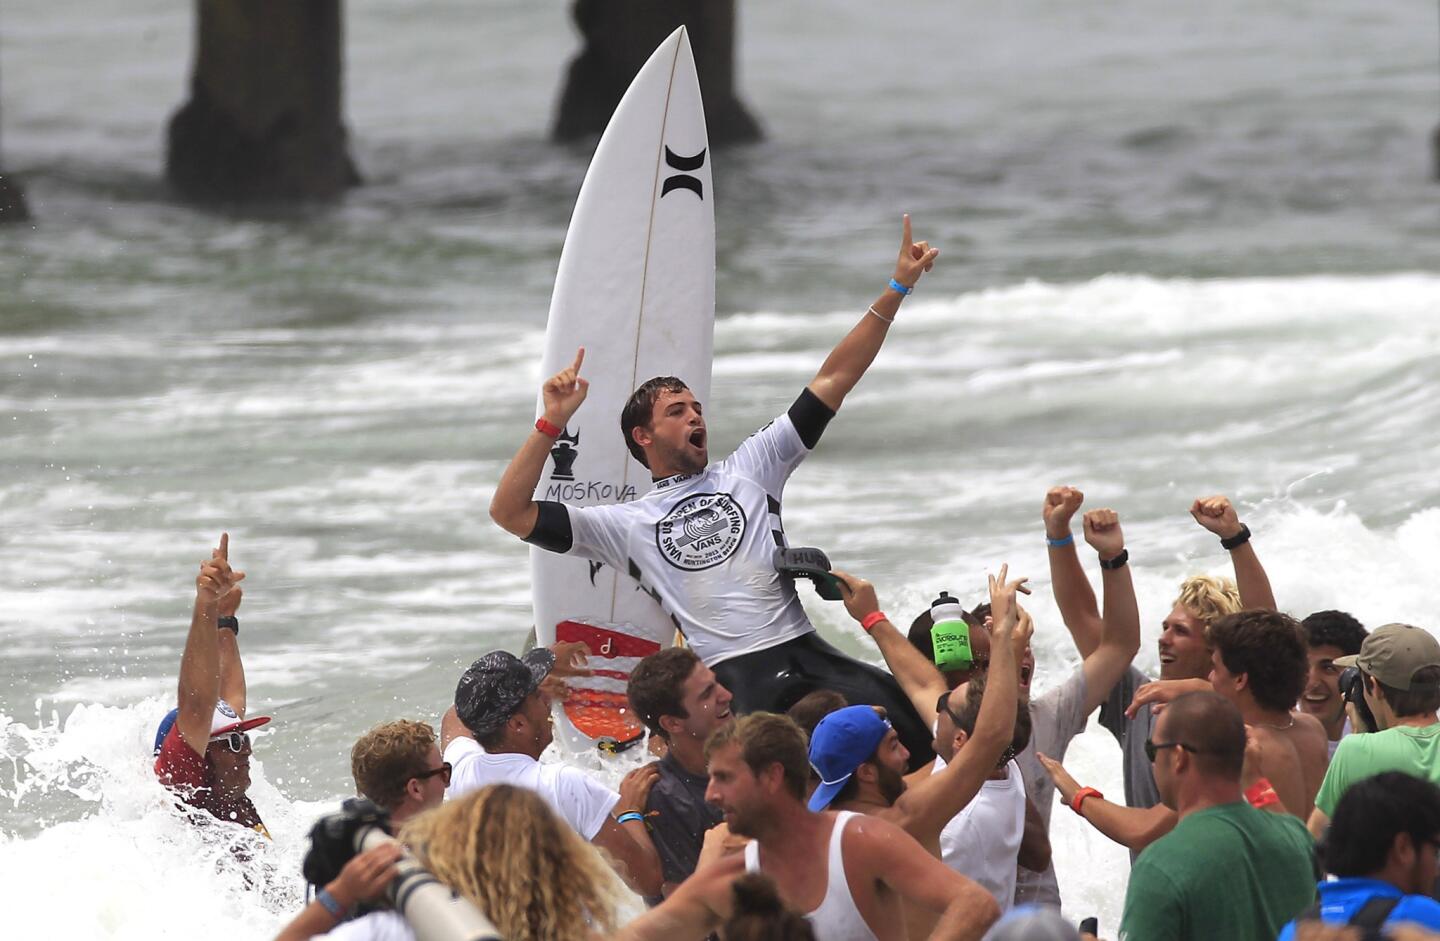 Brazilian surfer Alejo Muniz is hoisted off the sand as he celebrates his win at the Vans US Open of Surfing in Huntington Beach.